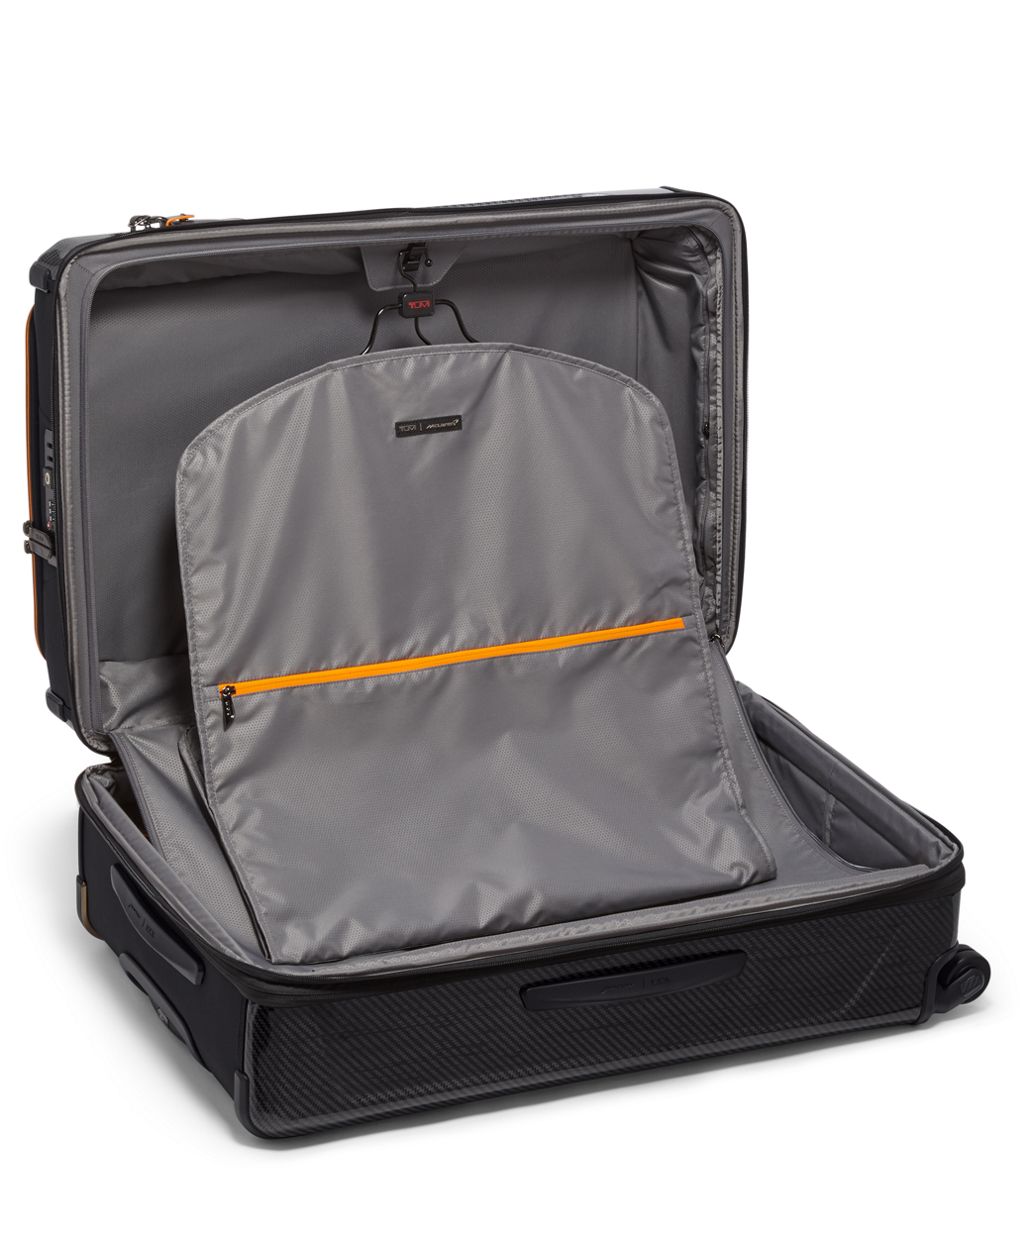 Aero Extended Trip Packing Case | Tumi US